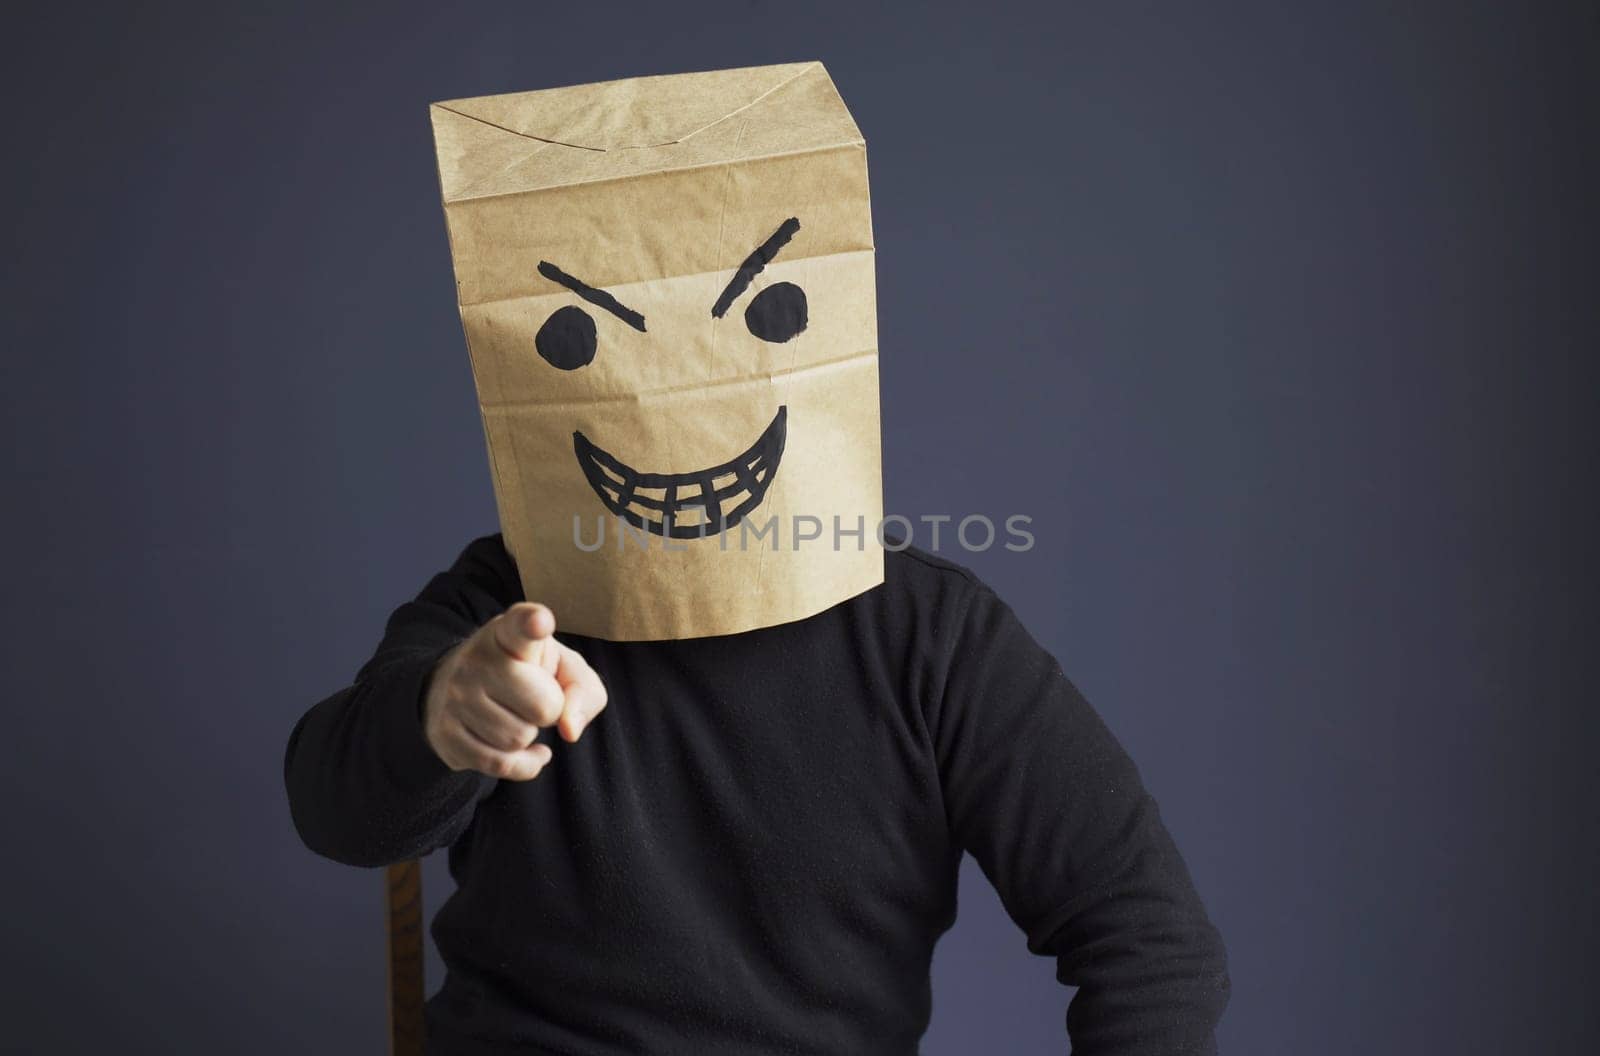 A man in a black turtleneck with a paper bag with an angry emoticon on his head shows his hand pointing forward. Emotions and anger